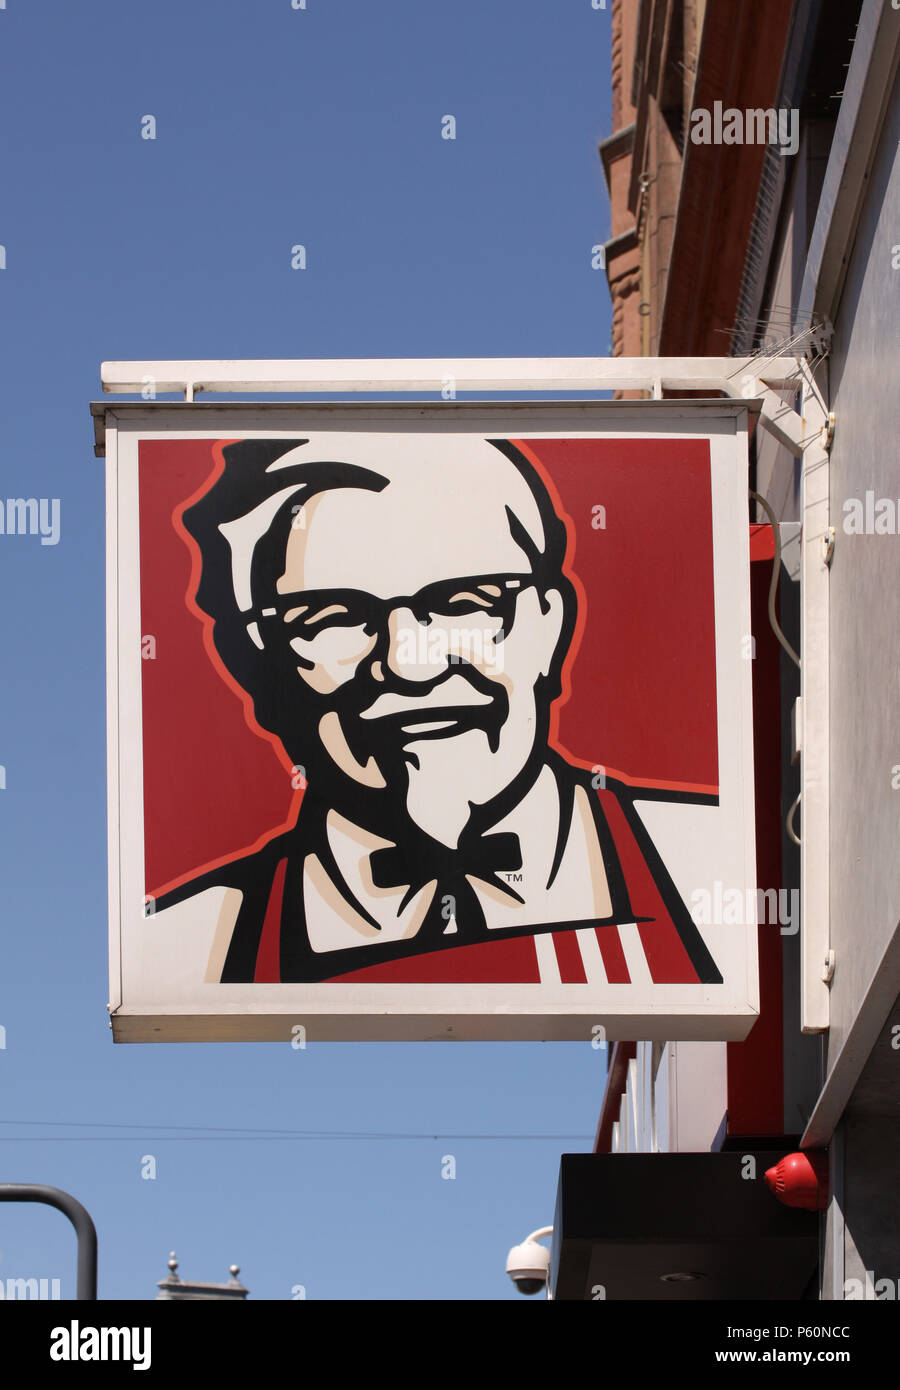 Copenhagen, Denmark - June 26, 2018: Kentucky Fried Chicken (KFC) Sign on building with blue sky background. KFC is a fast food restaurant chain that  Stock Photo